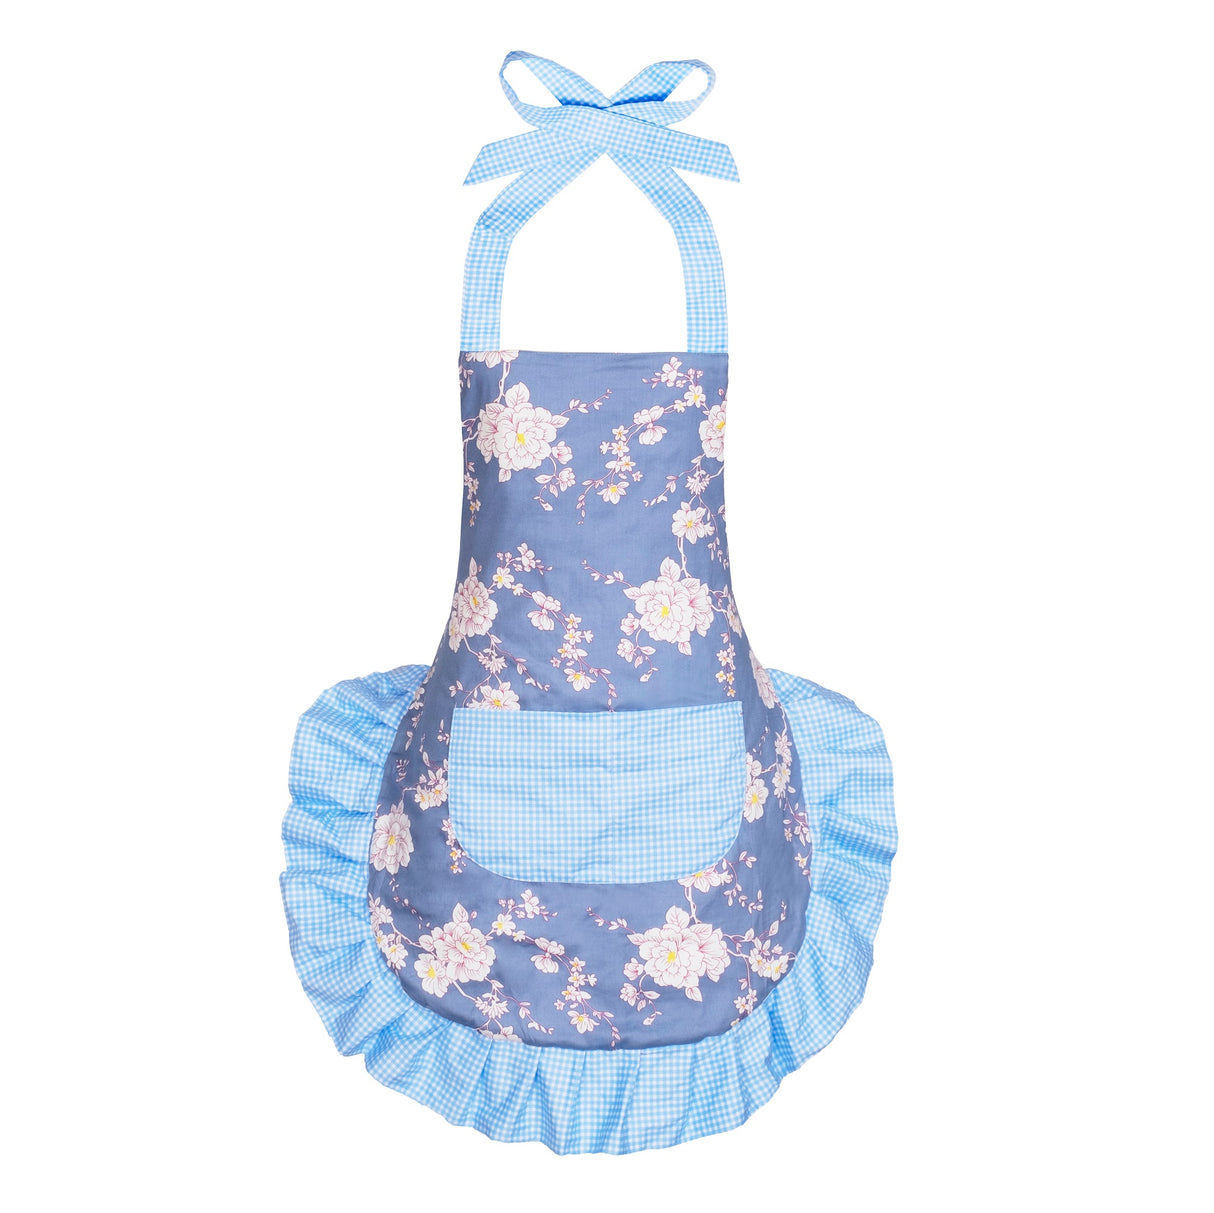 SINUOLIN Floral Apron with Pockets and Adjustable Shoulder Straps for Cooking and Baking Women Apron Gifts